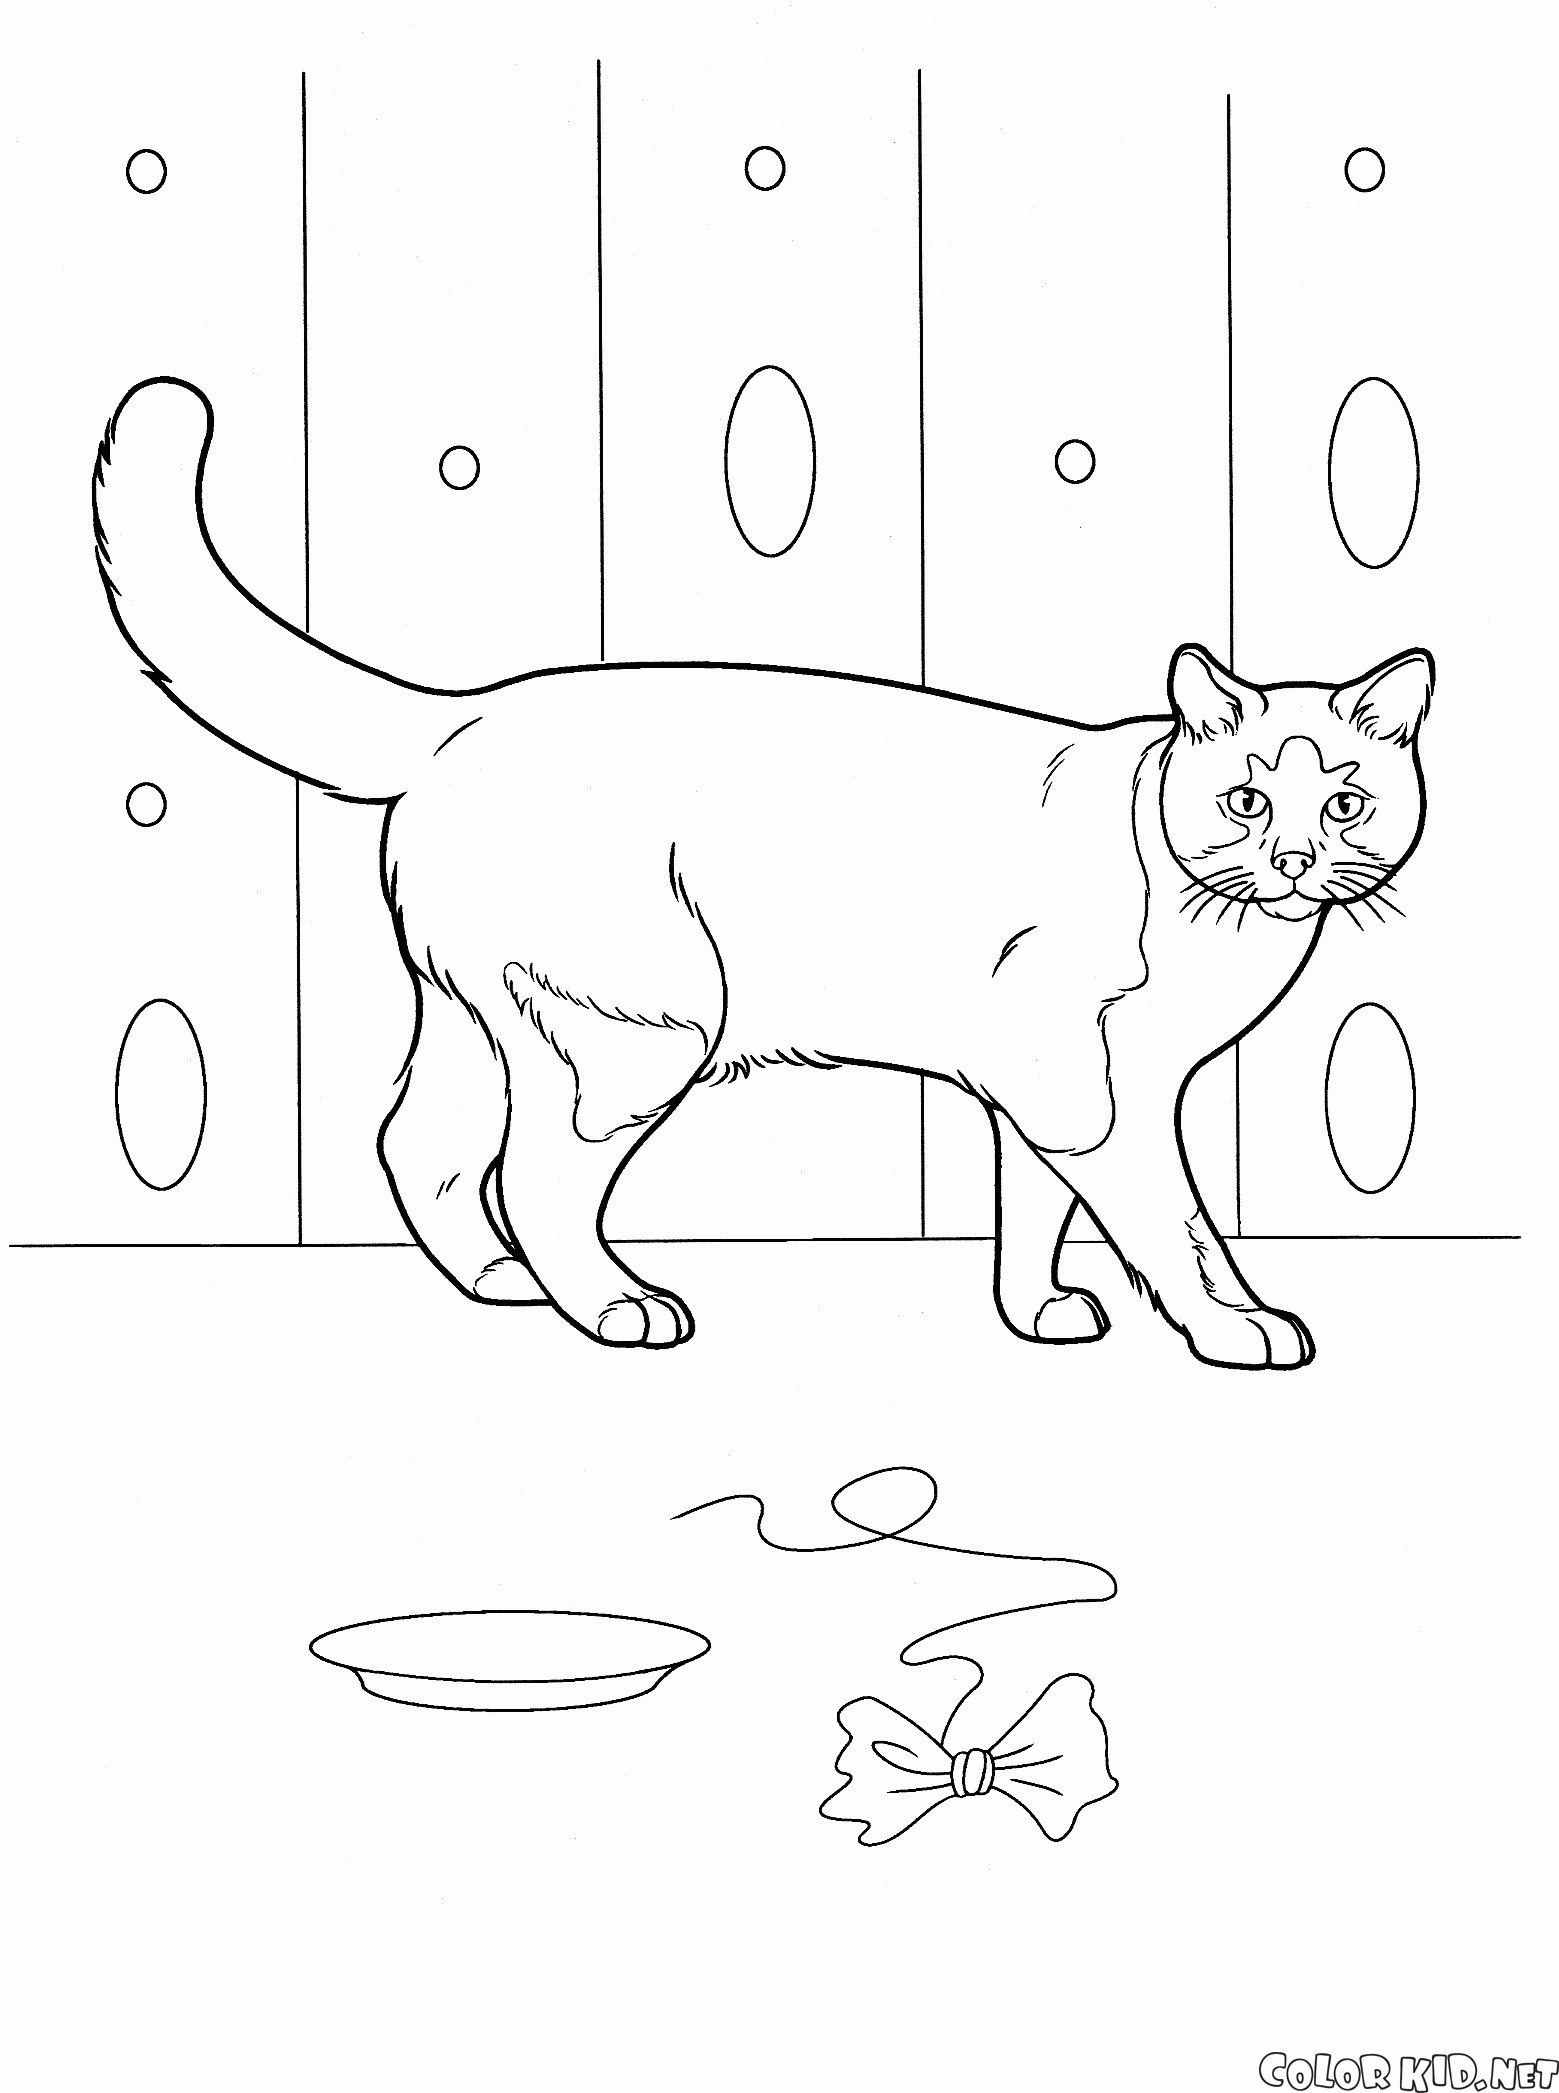 Coloring page - Domestic cat